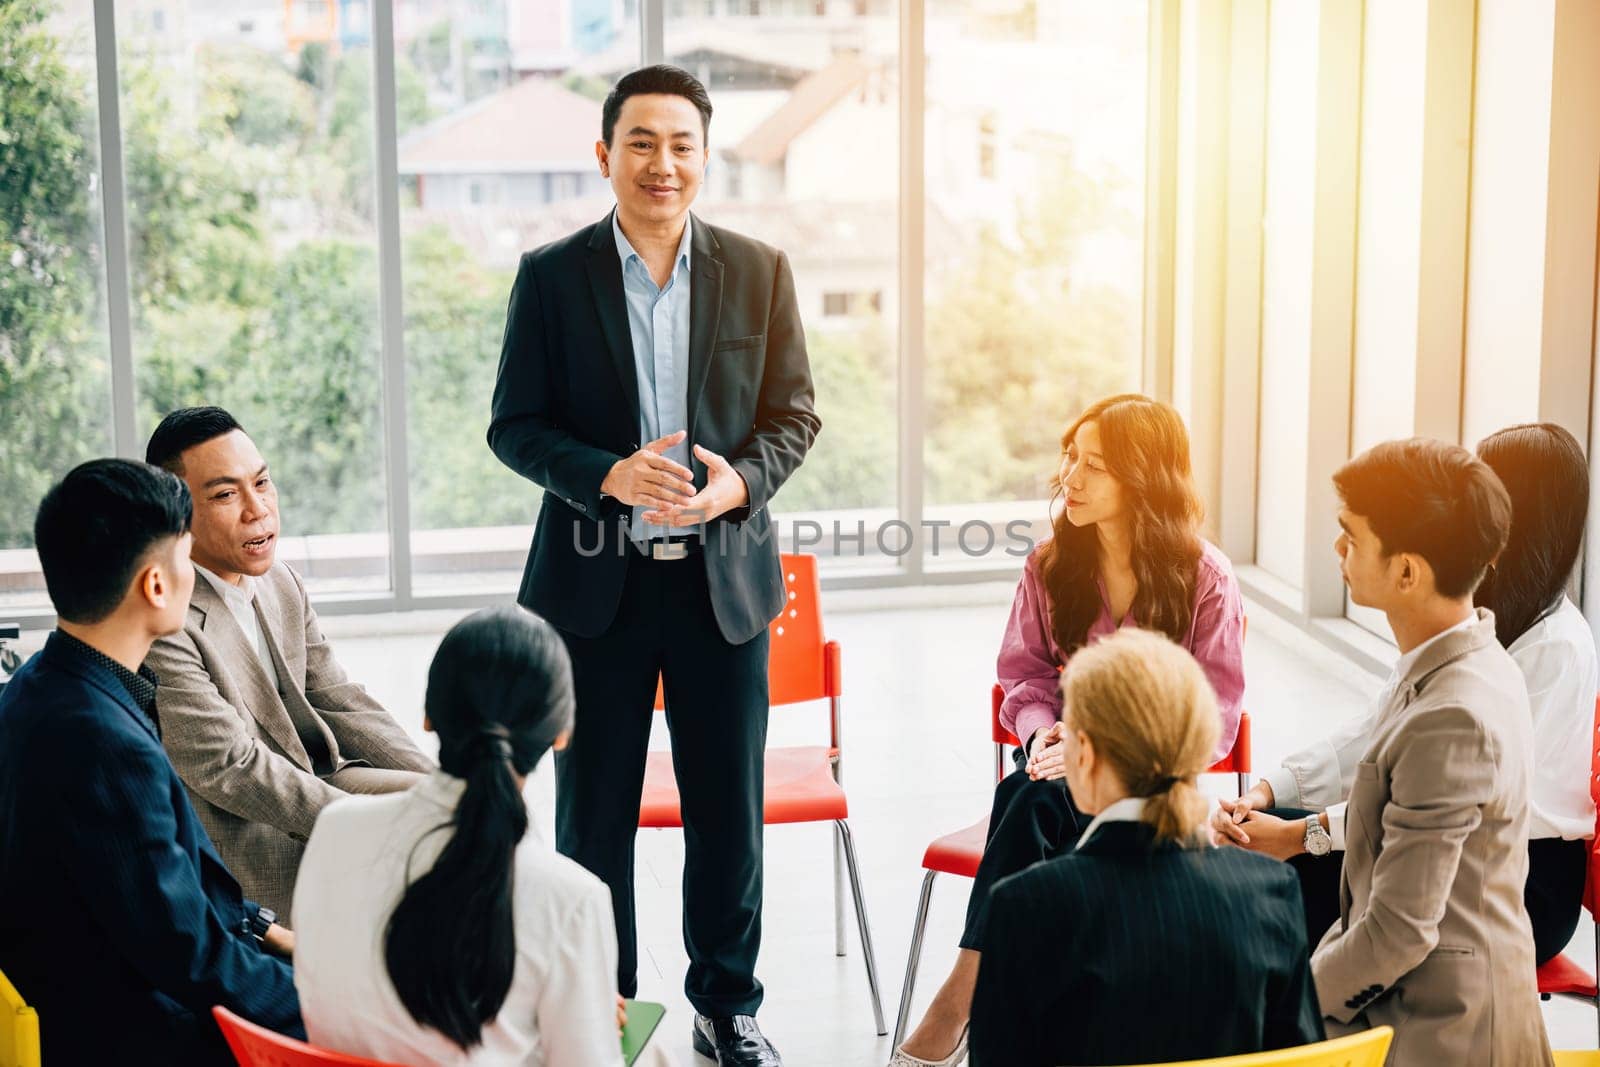 In a modern office, a diverse group of businesspeople plans, discusses, and presents in a business meeting seminar room. Their teamwork, diversity, and confidence drive success.